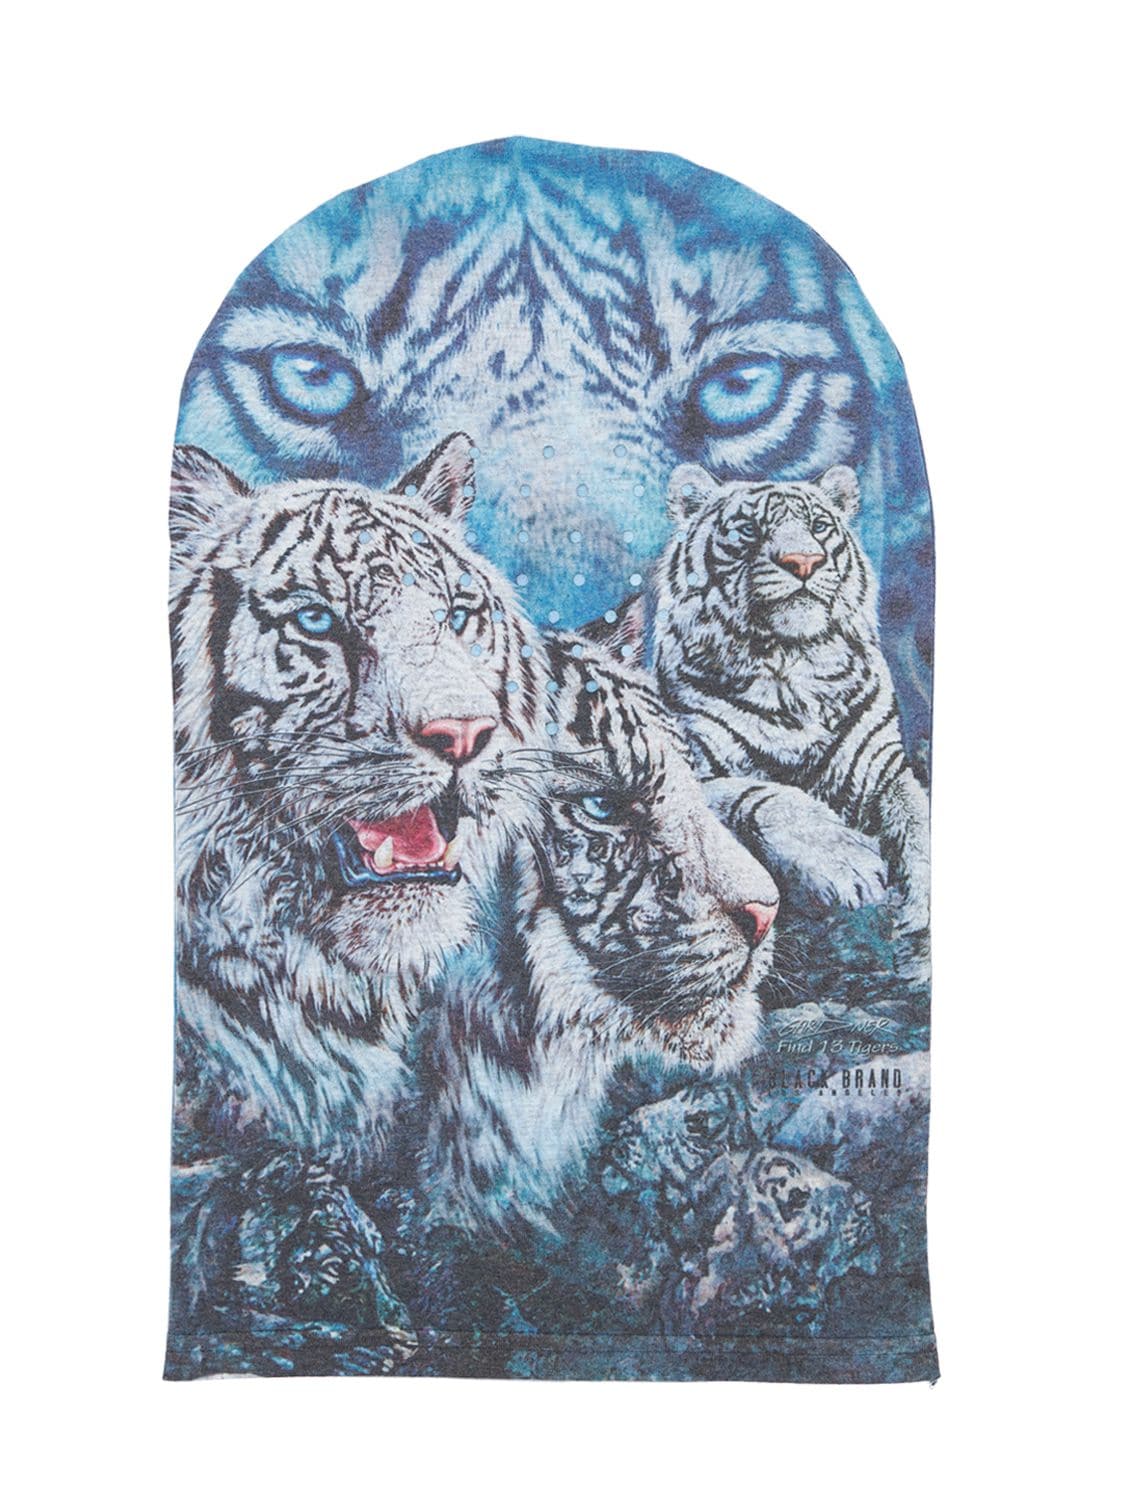 BLACK BRAND LOS ANGELES White Tigers Print Hooded Face Mask